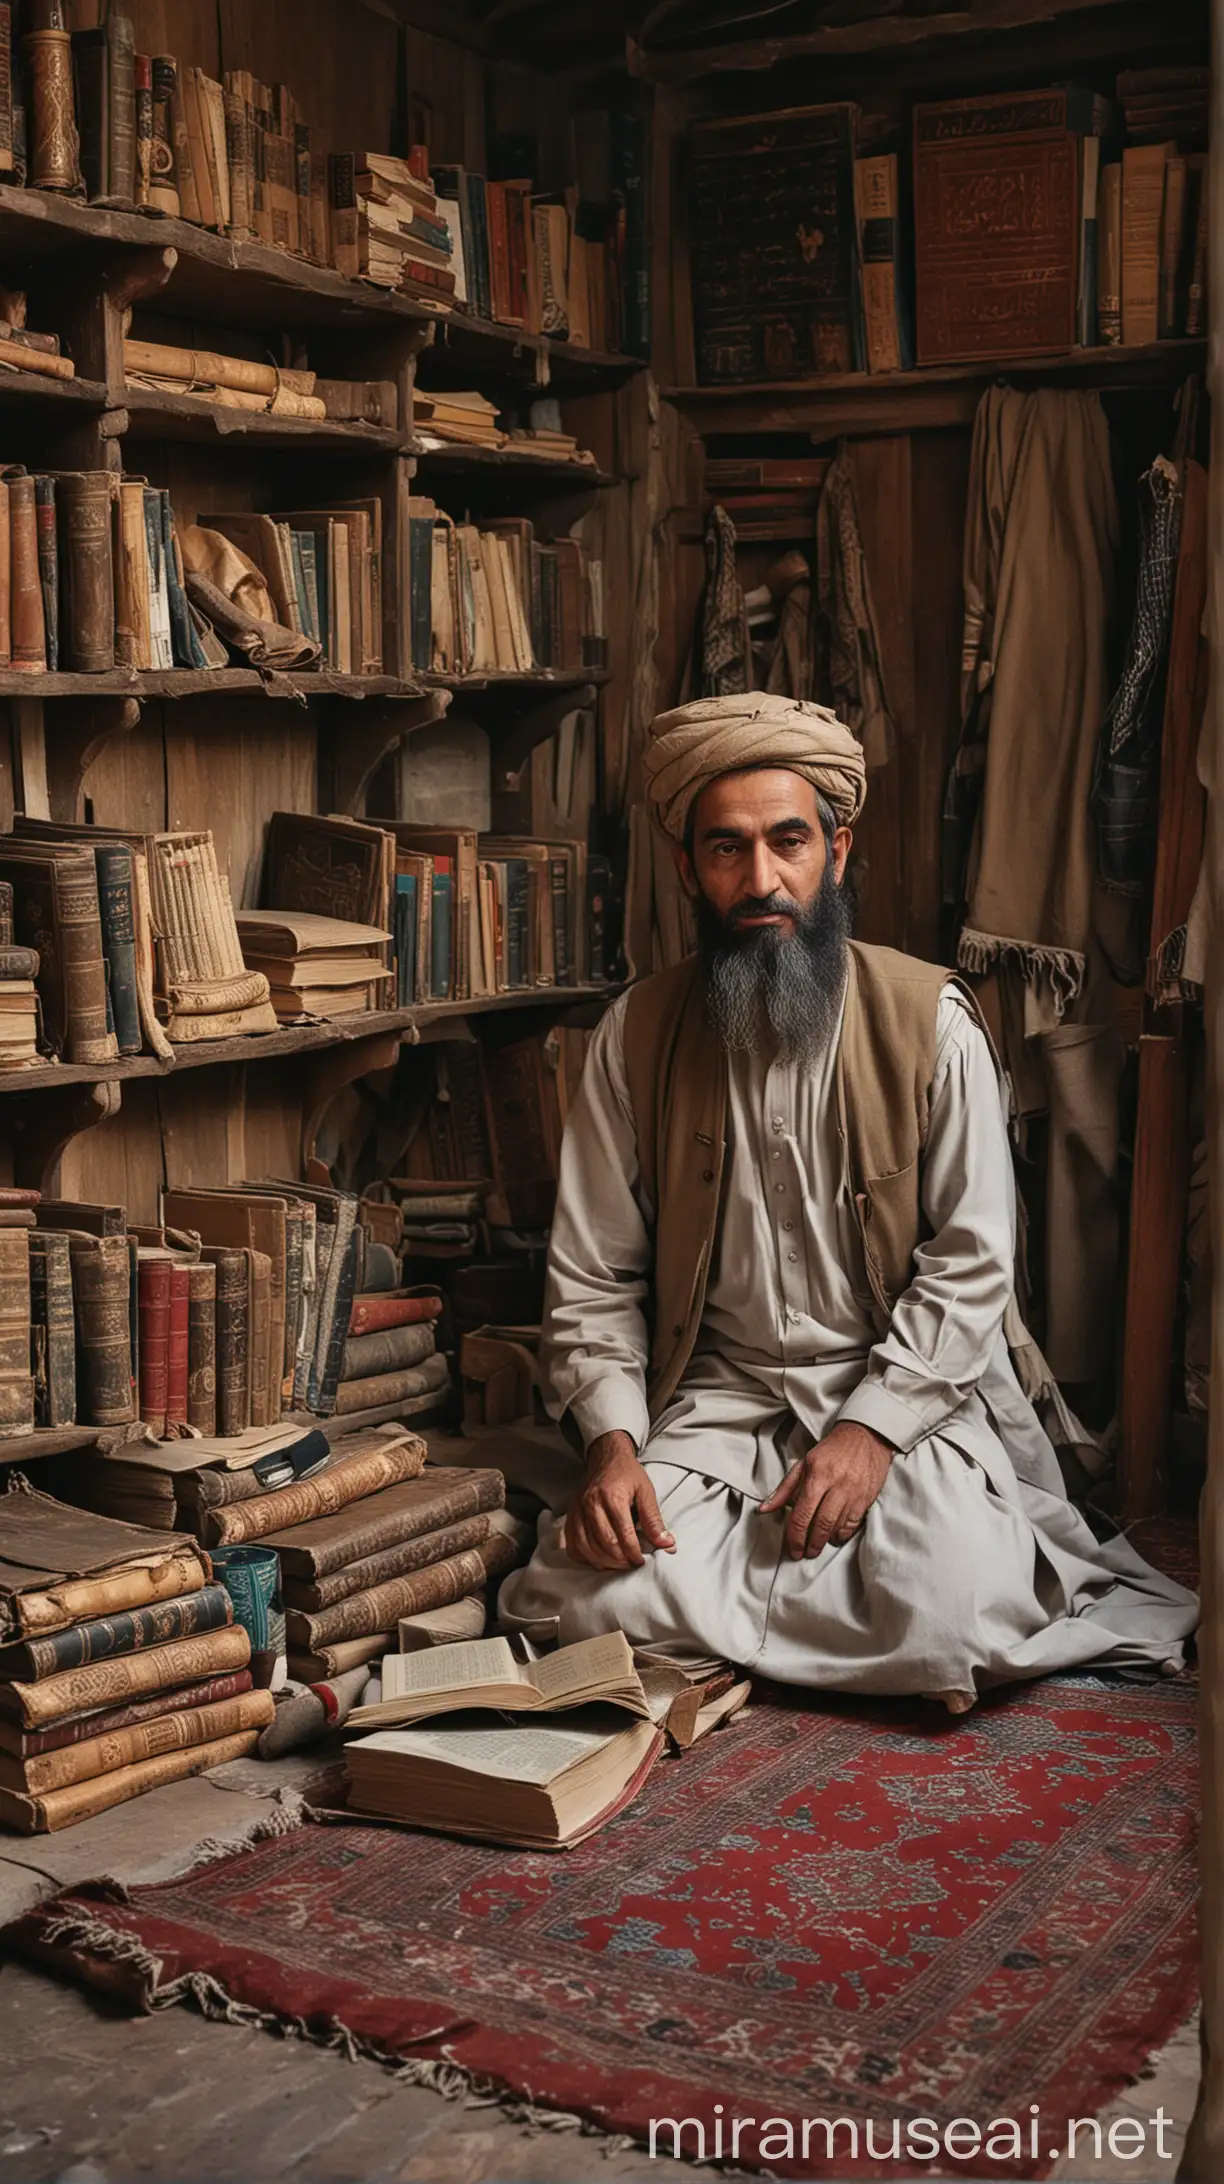 Inside an old lodge, Sheikh Abdul Qadir Gilani sits in a modest and serene environment. Around him are authentic items and shelves filled with old books. In front of him, a man dressed in worn-out clothes is kneeling and speaking.
